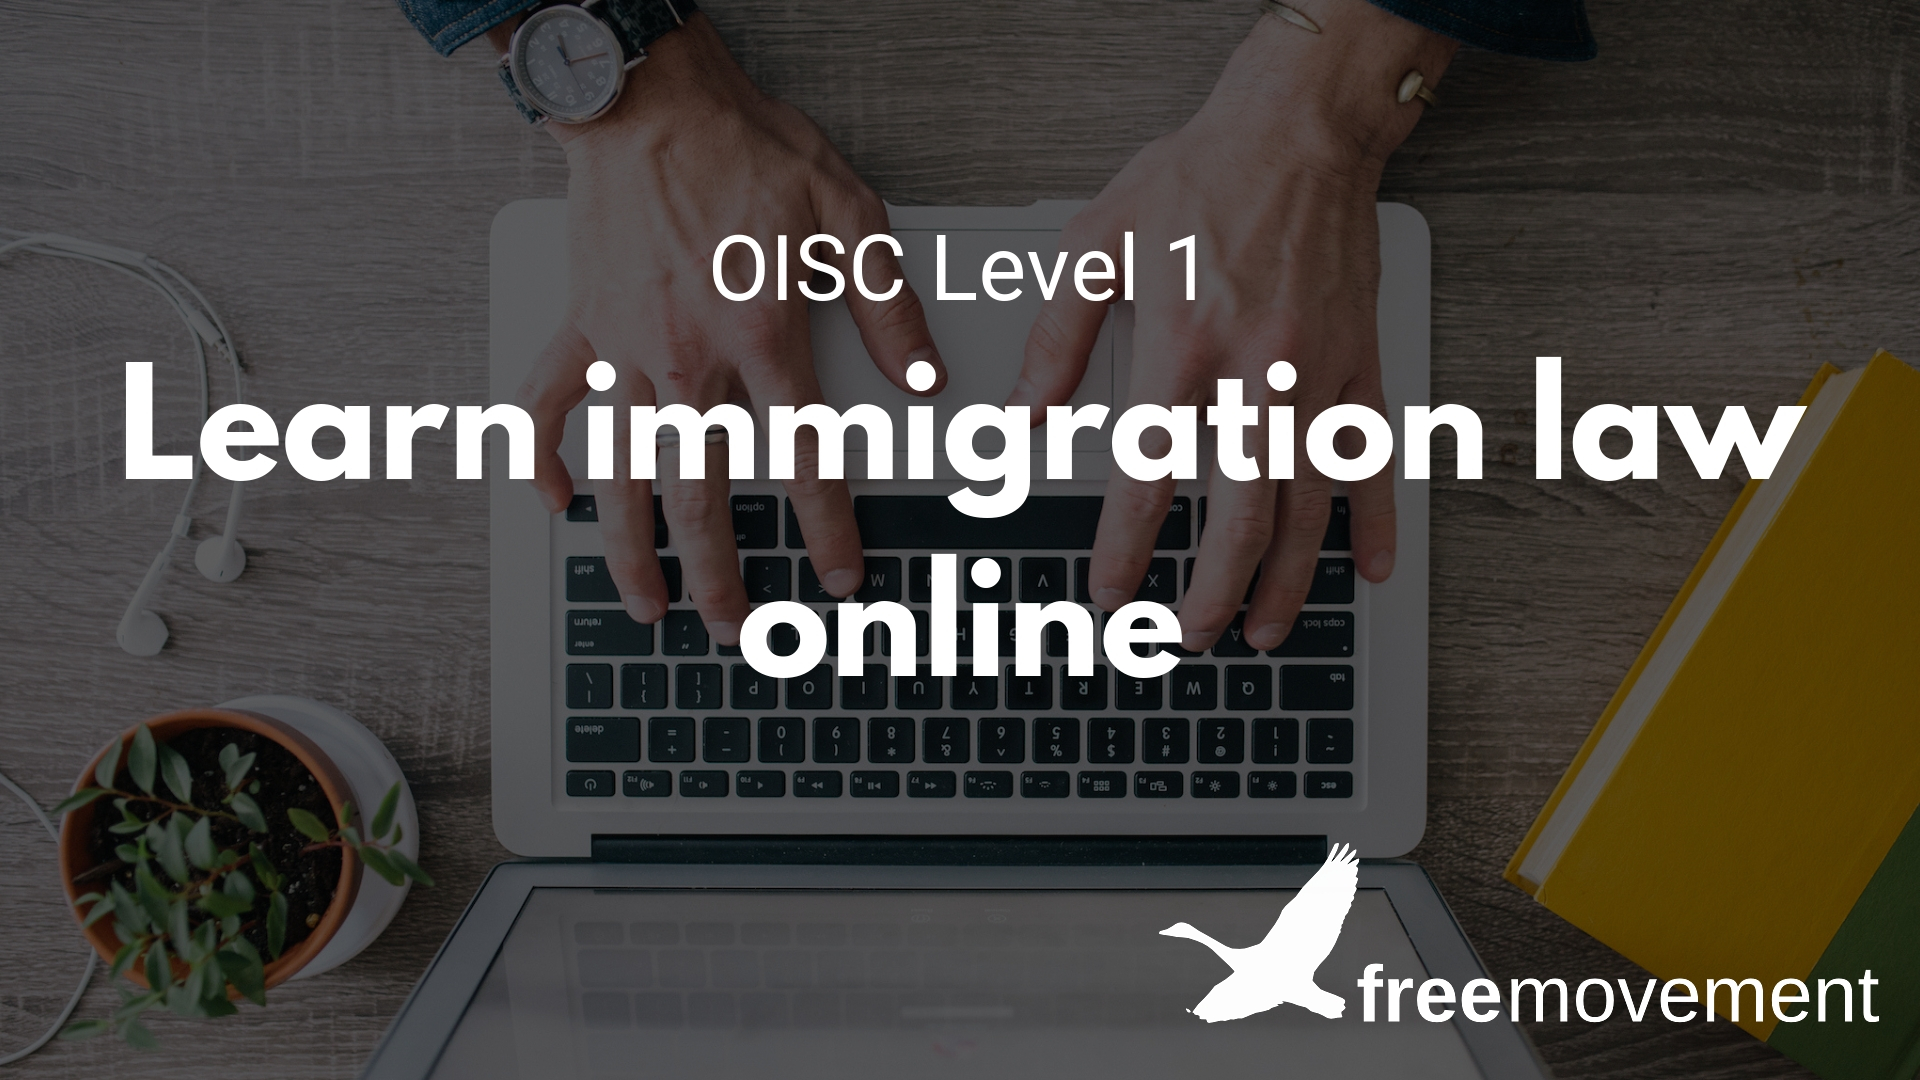 New learn immigration law course: perfect for OISC Level 1